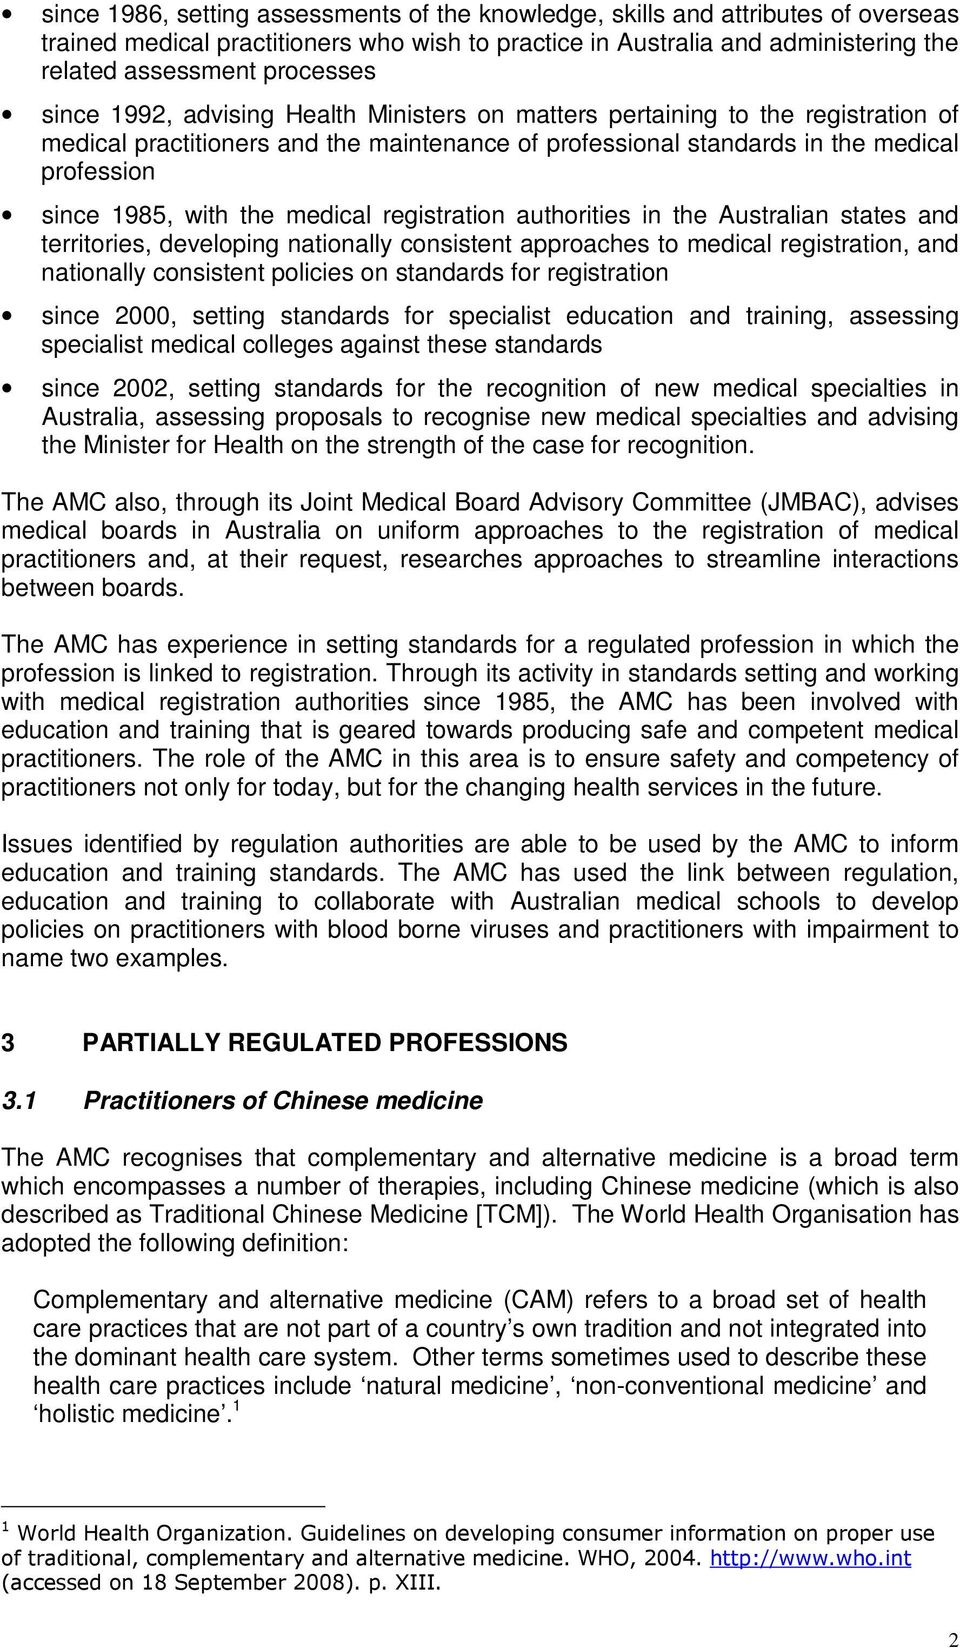 medical registration authorities in the Australian states and territories, developing nationally consistent approaches to medical registration, and nationally consistent policies on standards for